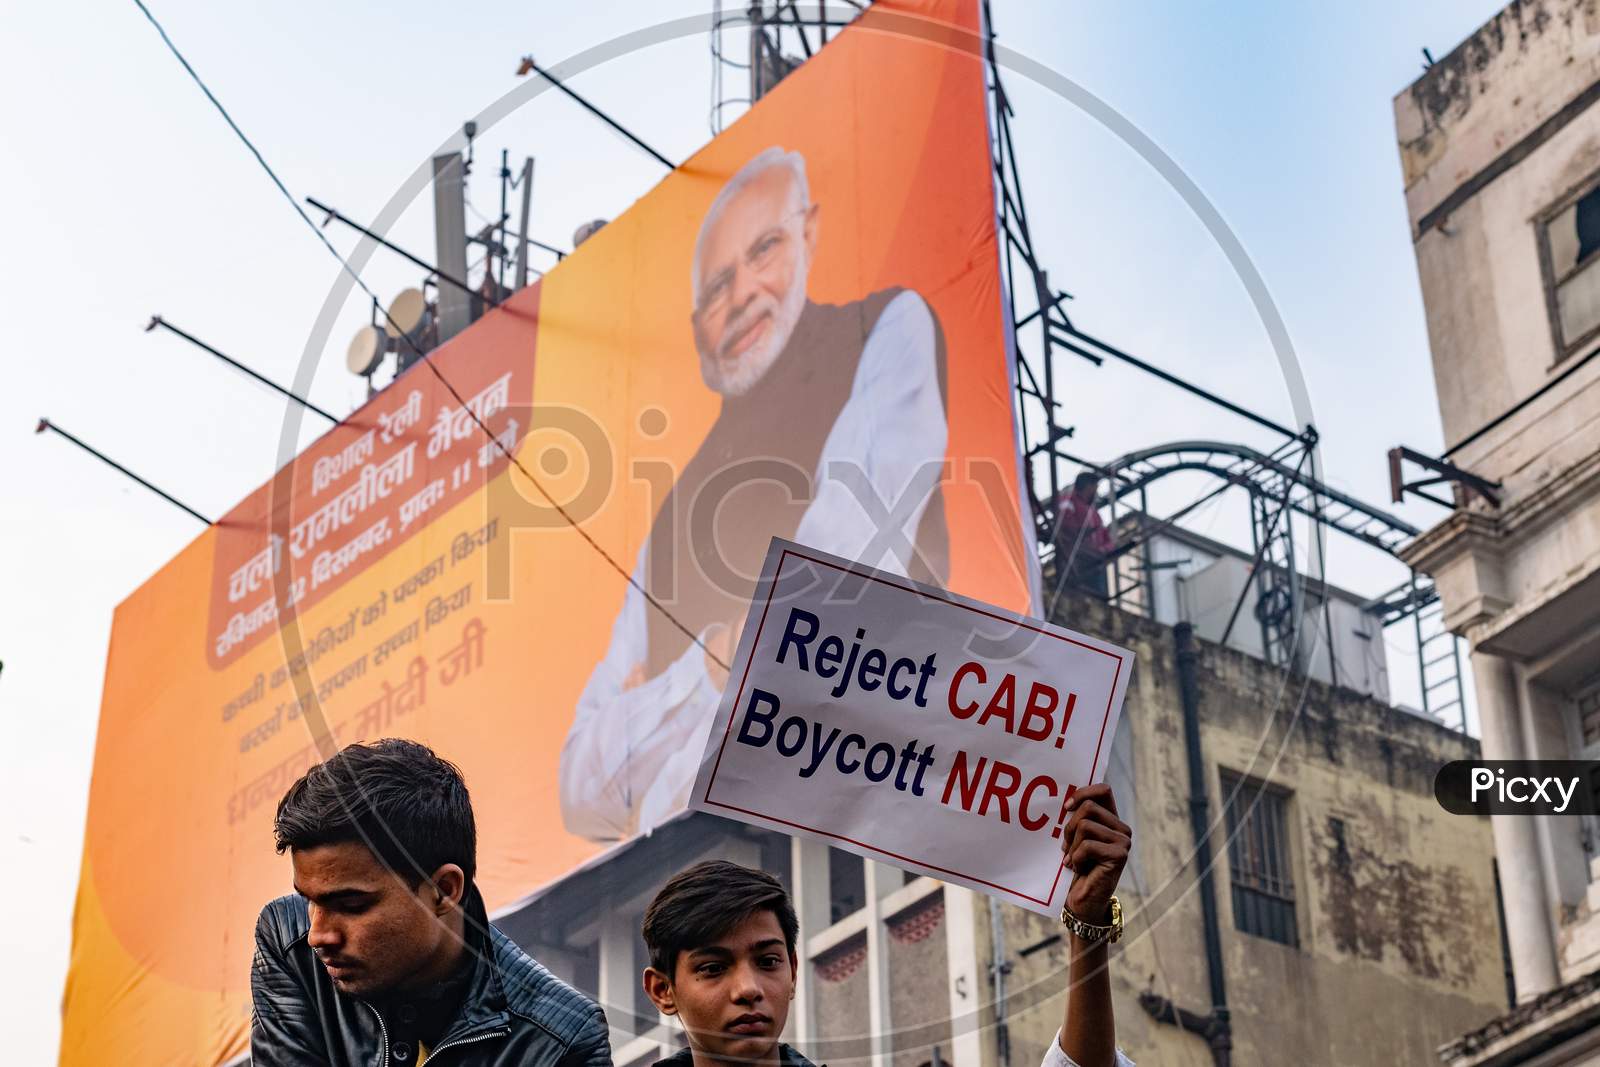 A man holding the banner and picture of PM Narendra Modi on a hoarding in background during Protest against CAA (Citizenship Amendment Act 2019) and NRC(National Register of Citizens)